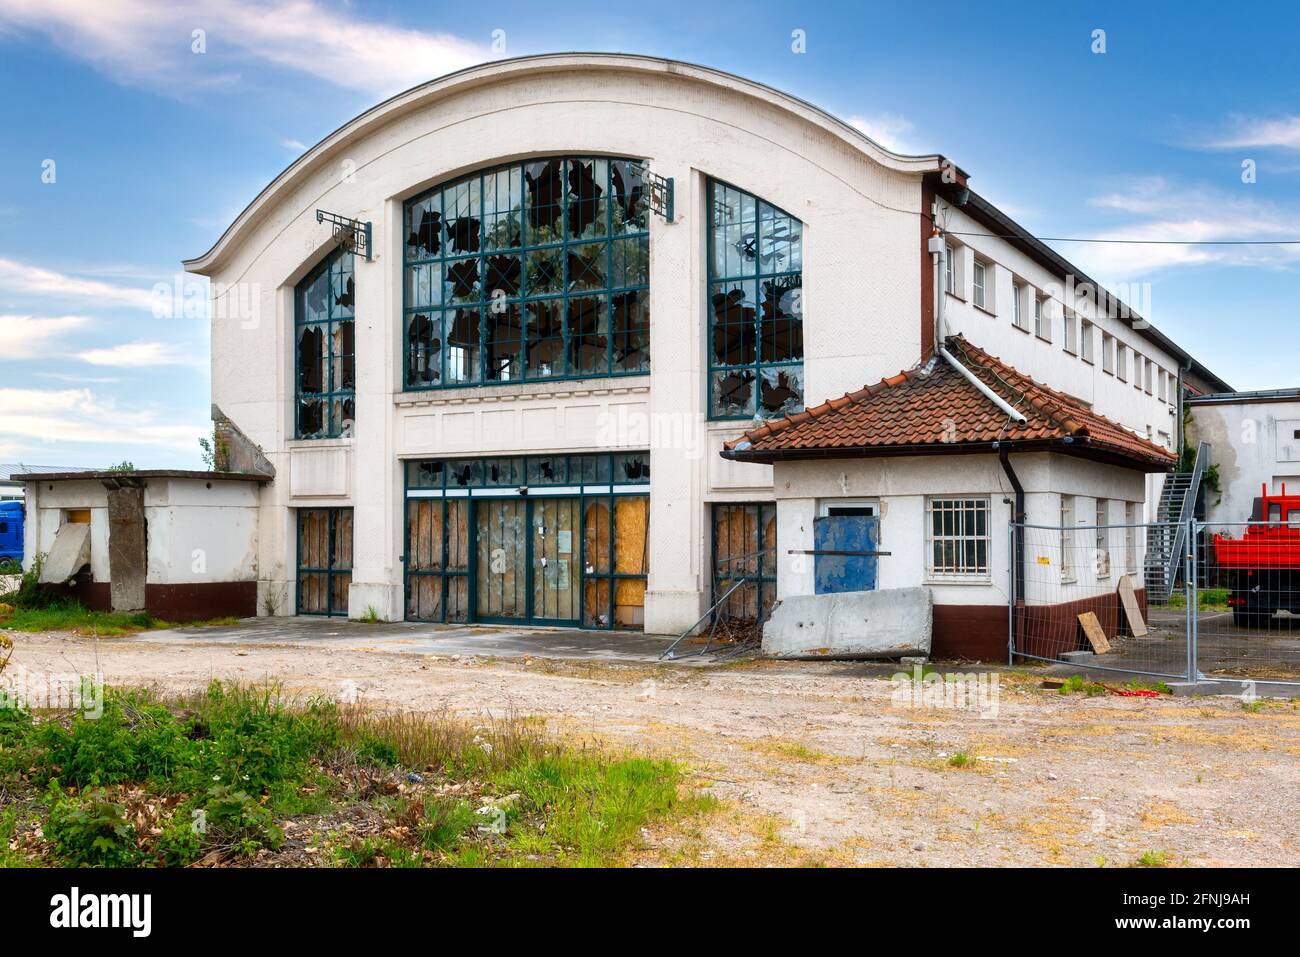 Worms,Germany, 05/09/2021: Former building of a meat wholesaler in disrepair, Worms, Germany Stock Photo